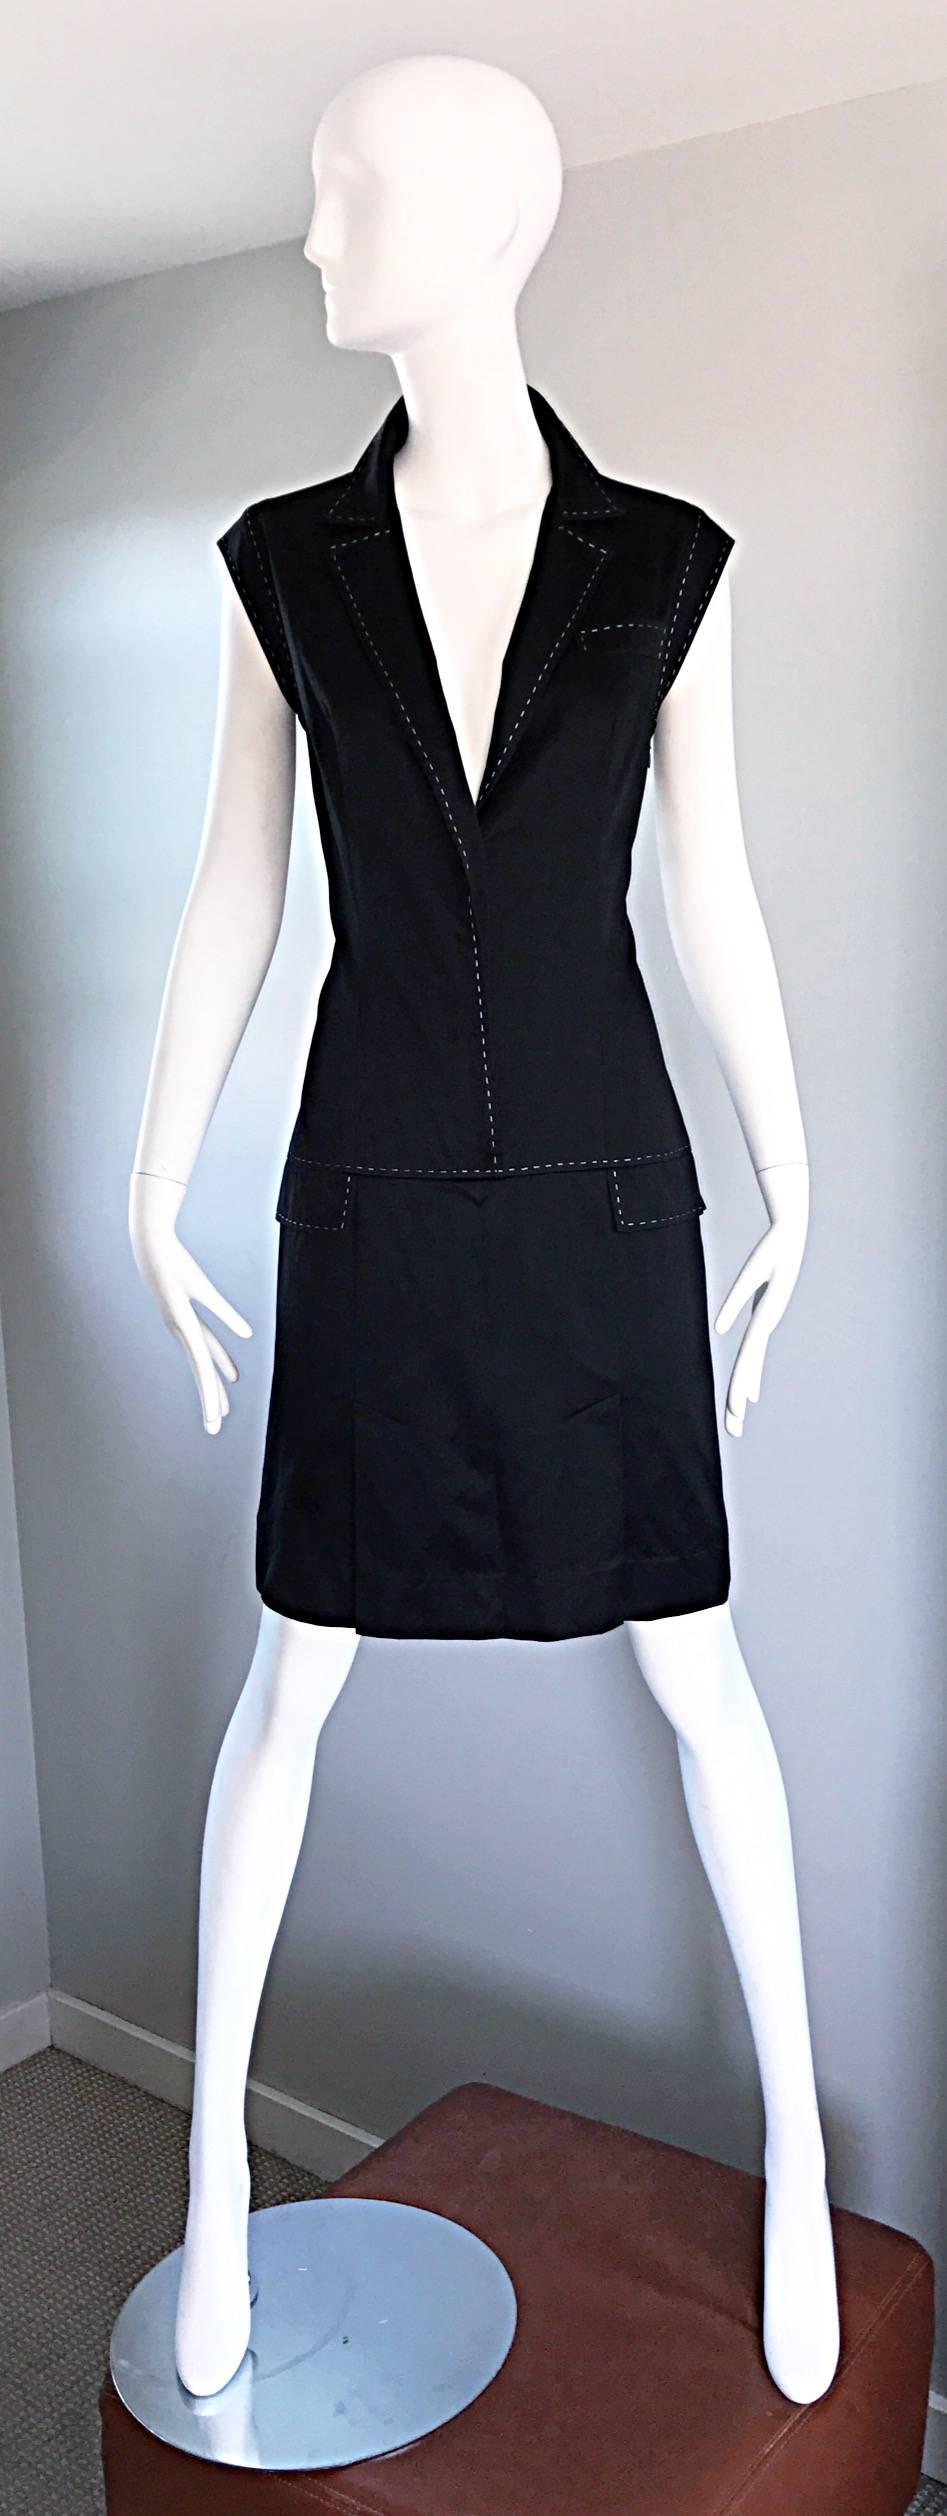 Givenchy Couture By Alexander McQueen 1990s Black and White Shirt Dress Size 38 5